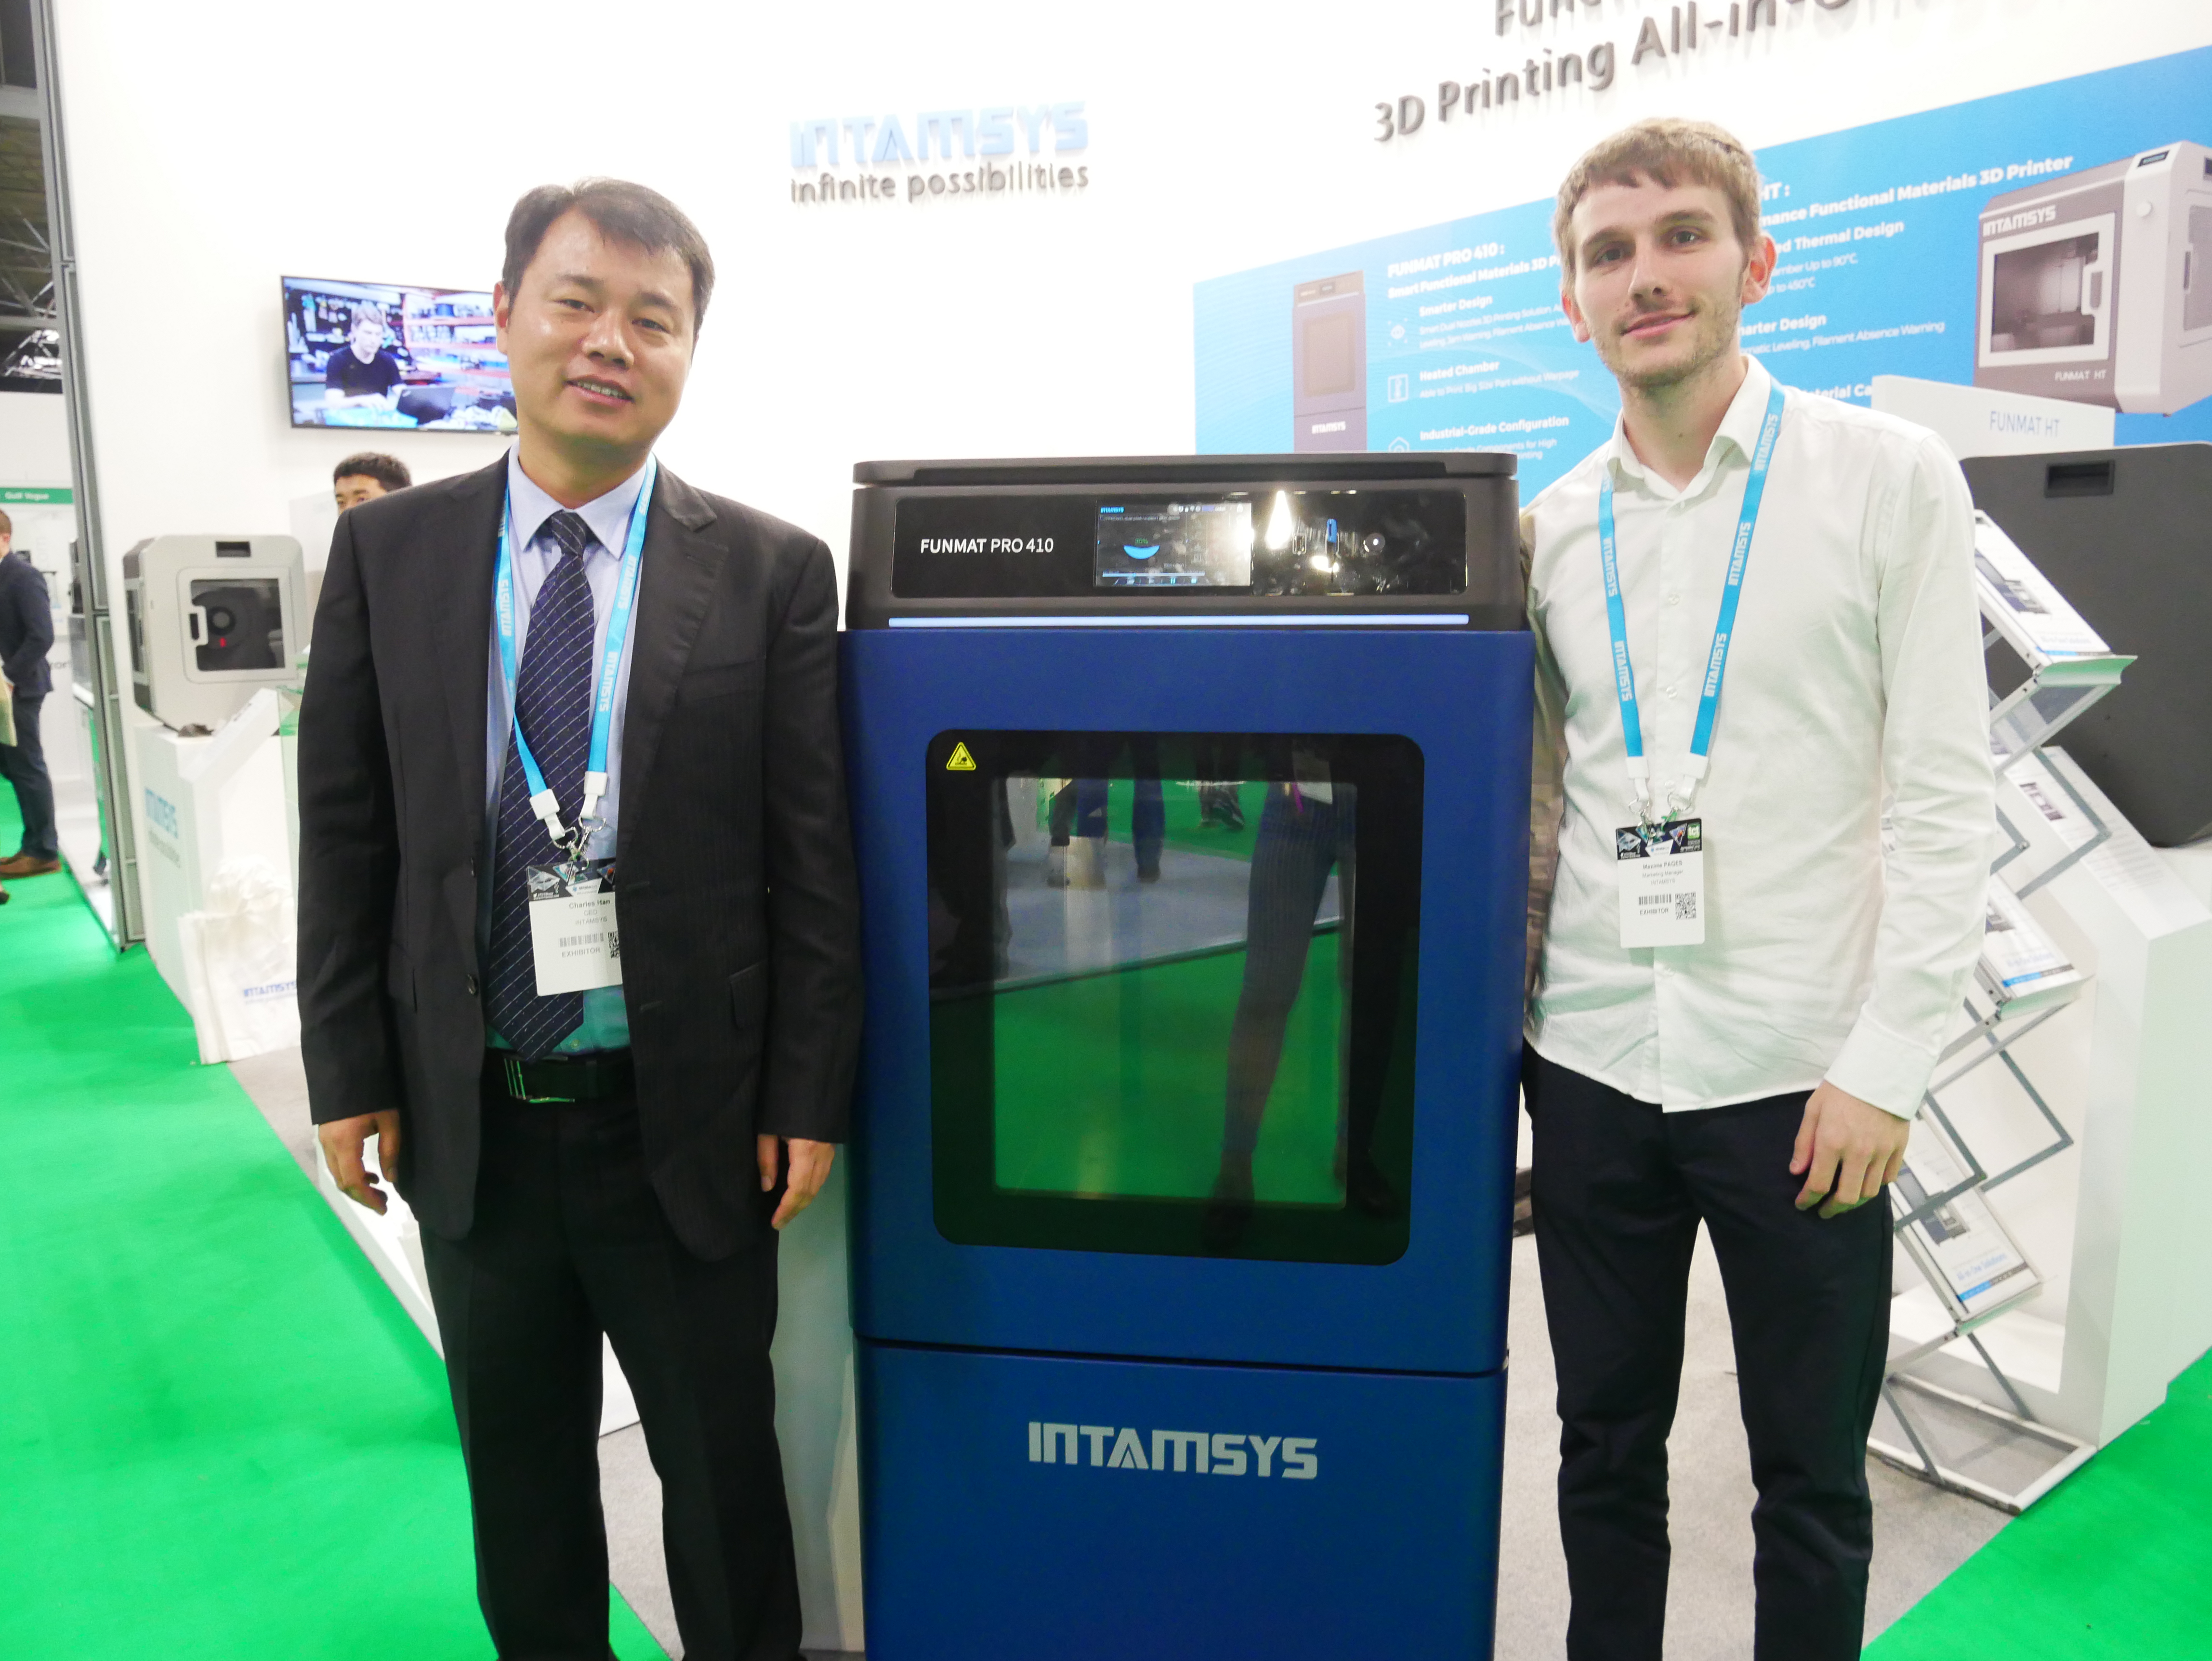 Charles Wan, CEO of Intamsys and Maxime Pages, Marketing Manager at Intamasys with the FUNMAT PRO 410. Photo by Tia Vialva.